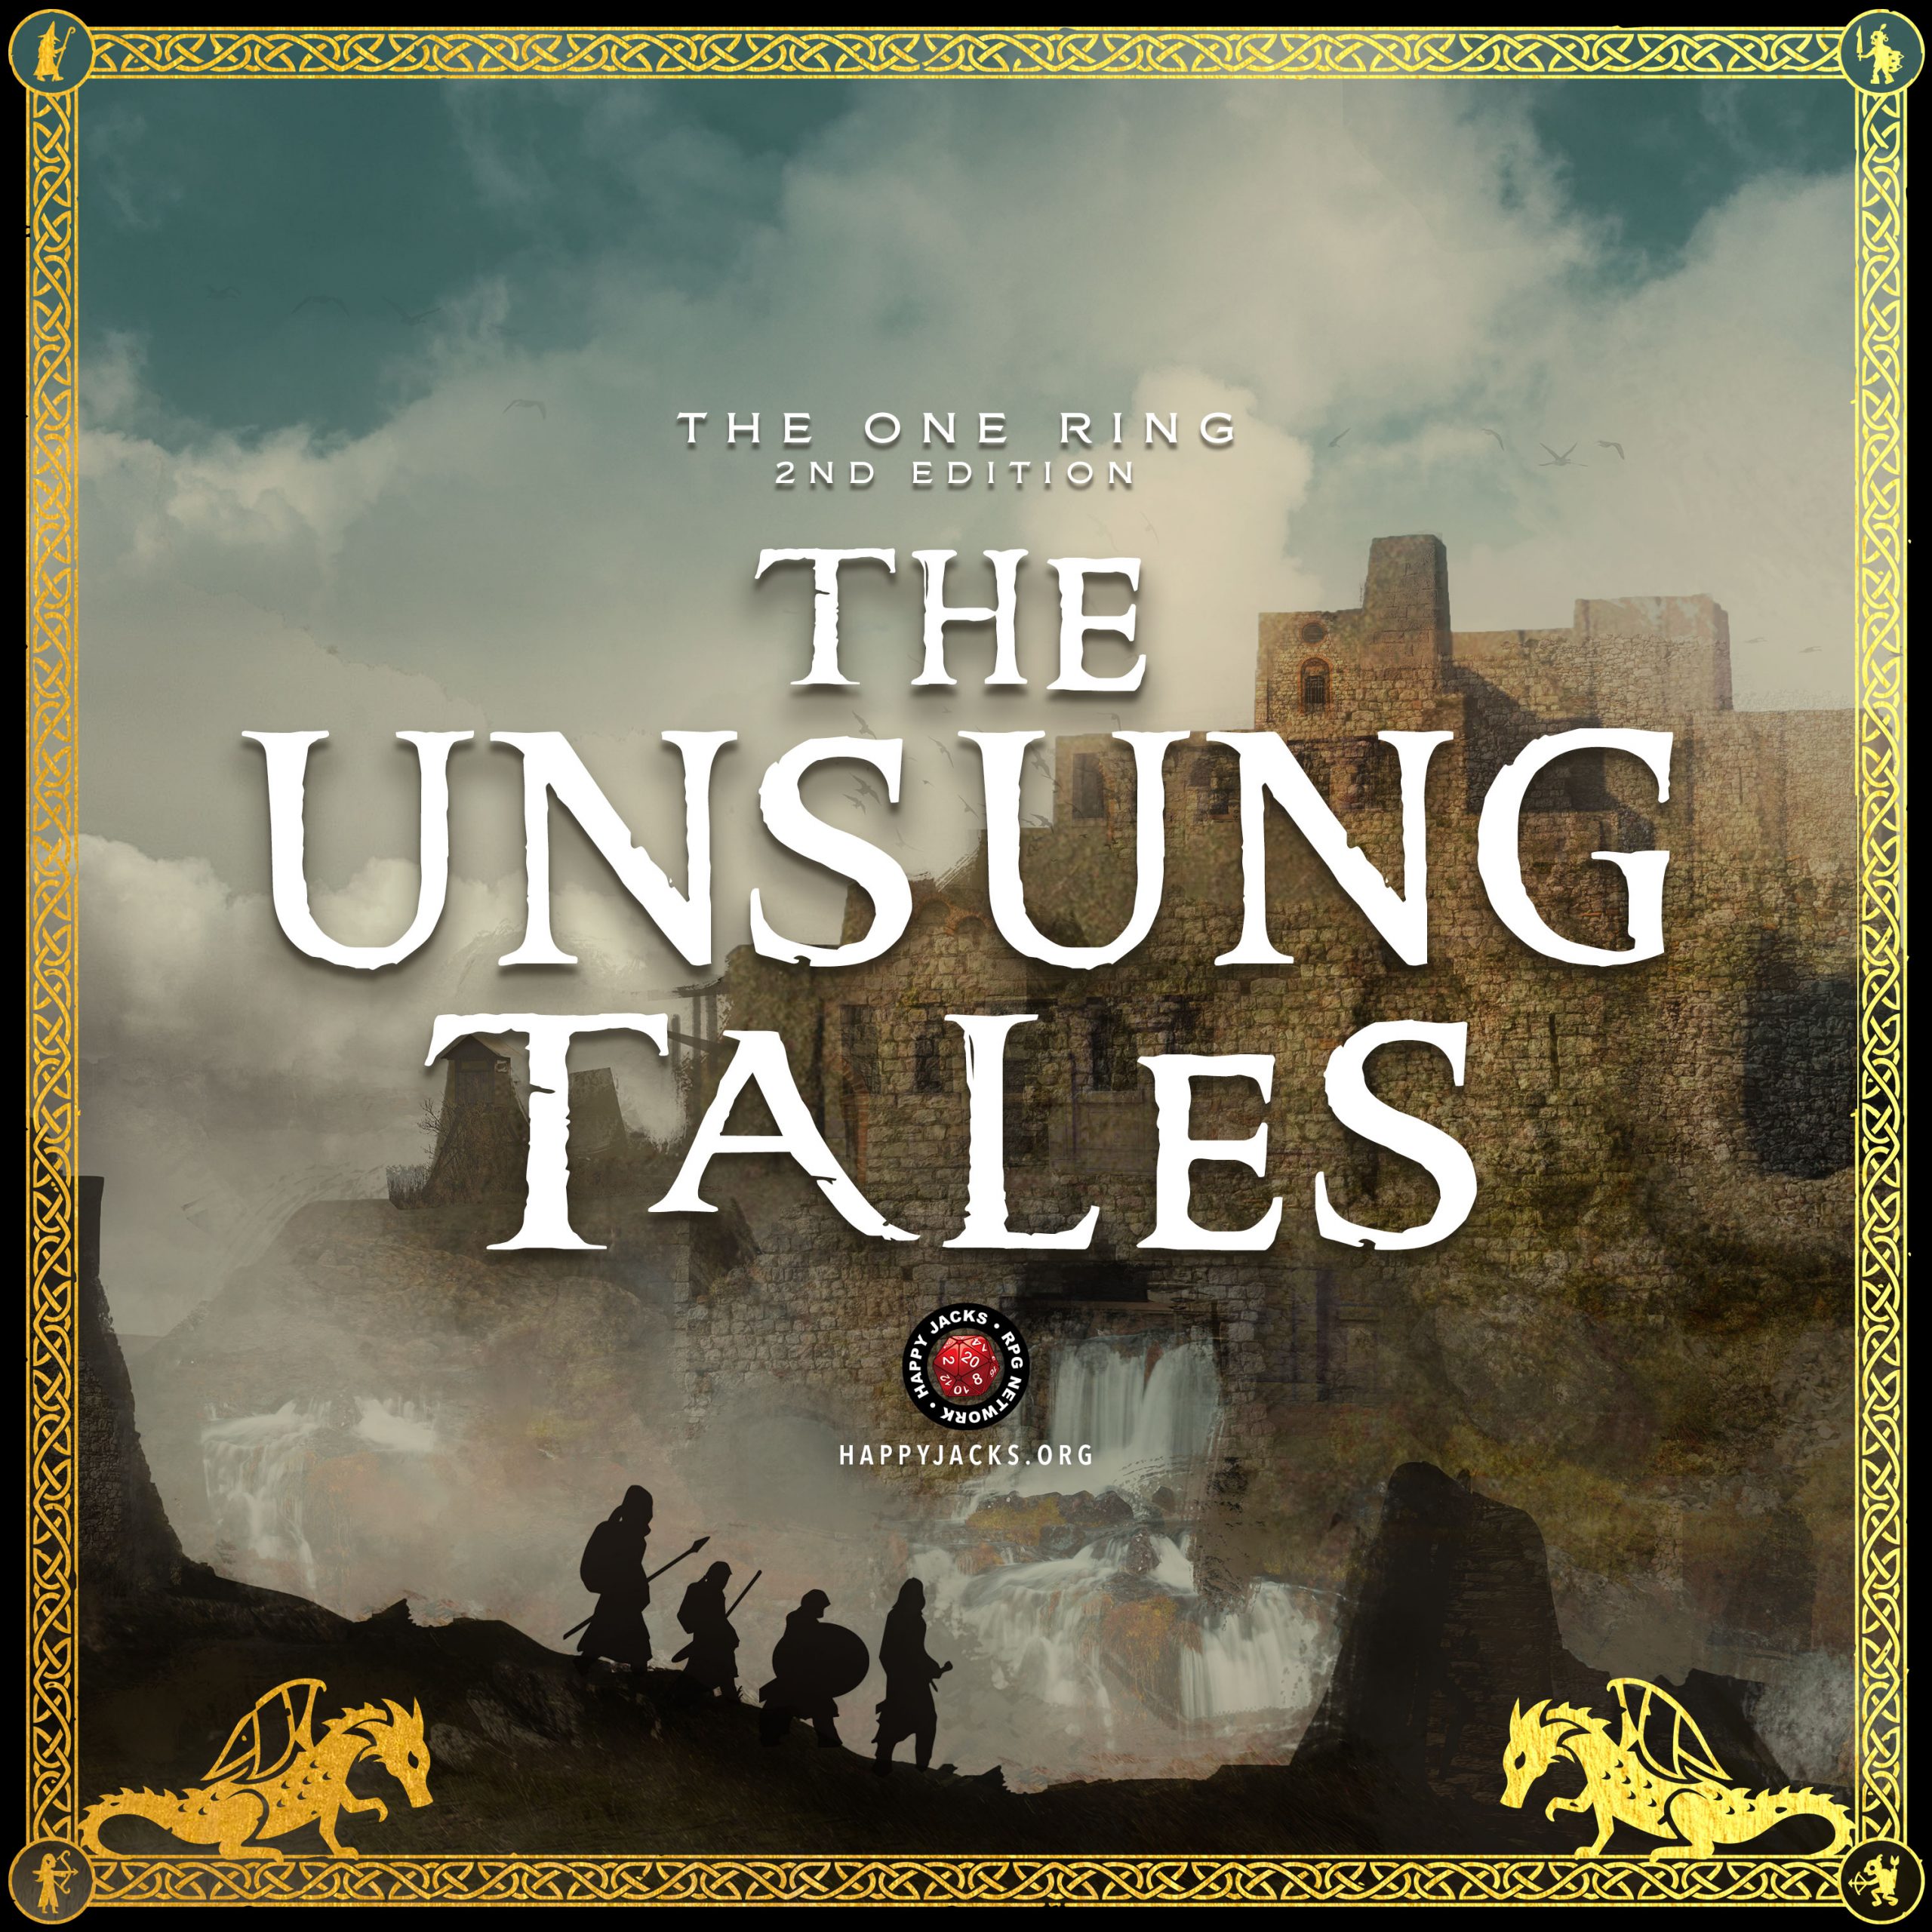 UNSUNG21 Clearing Skies | The Unsung Tales | The One Ring 2e